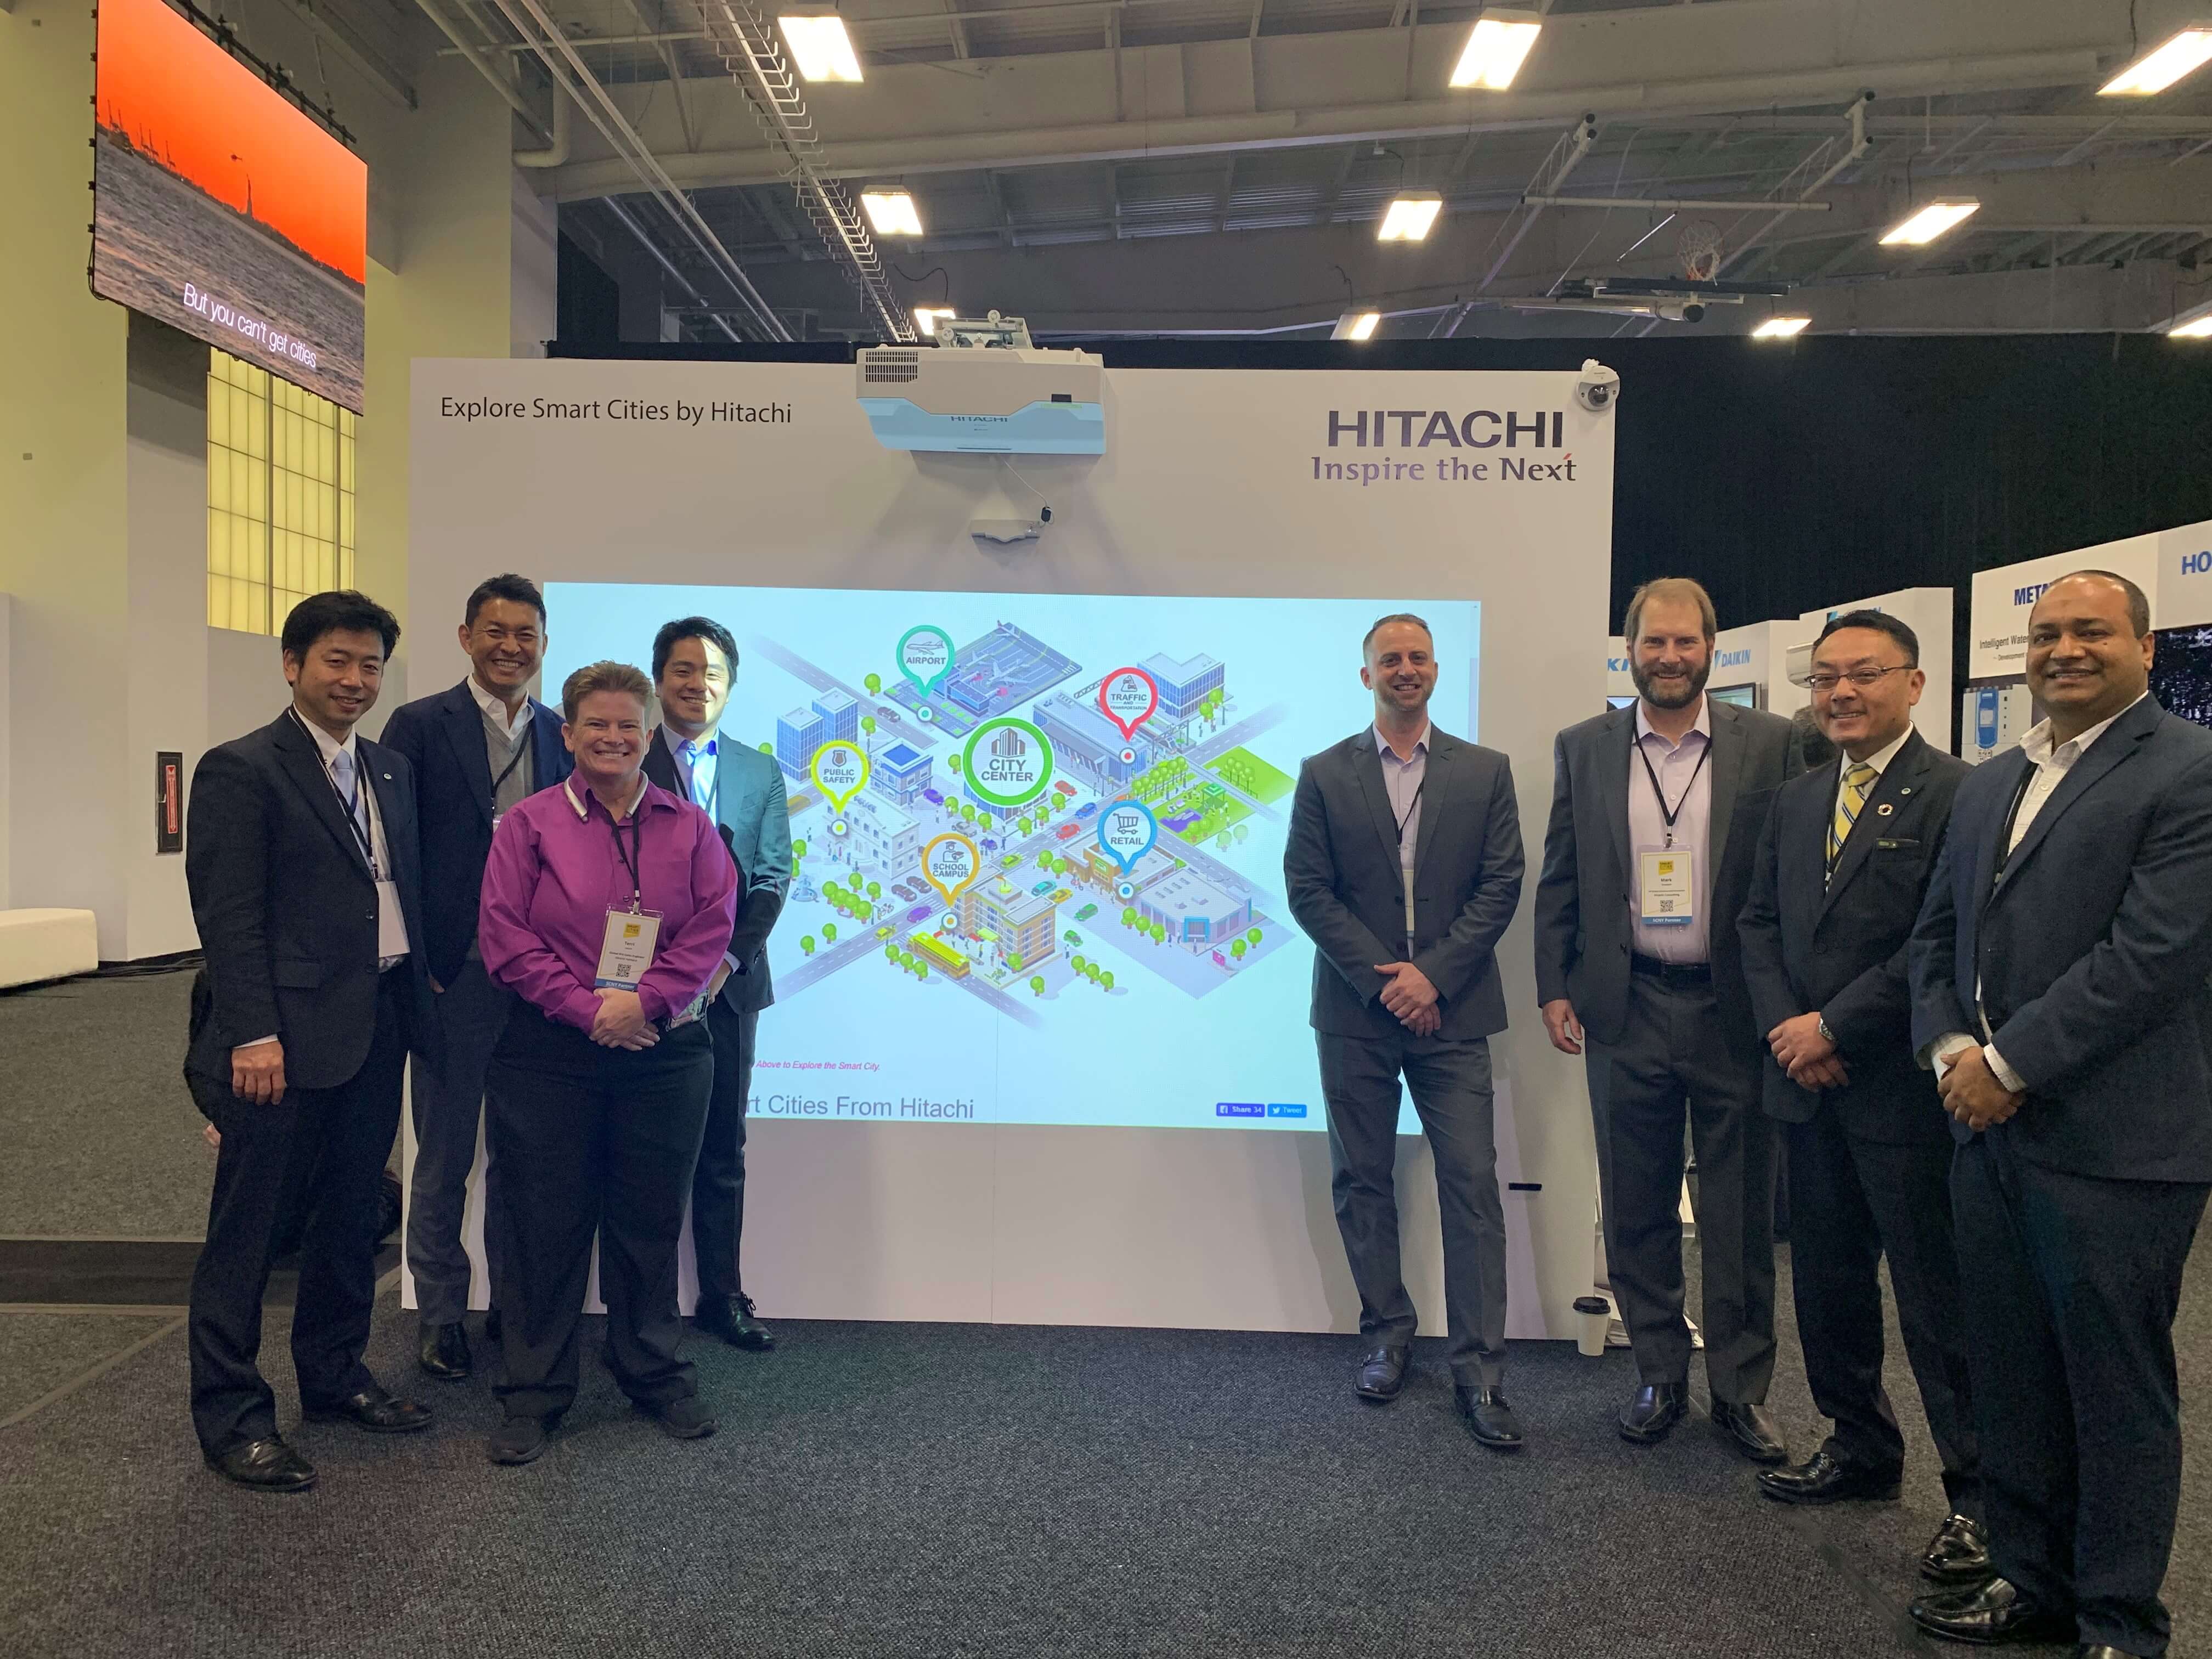 Explore Smart cities by Hitachi at Smart Cities New York 2019